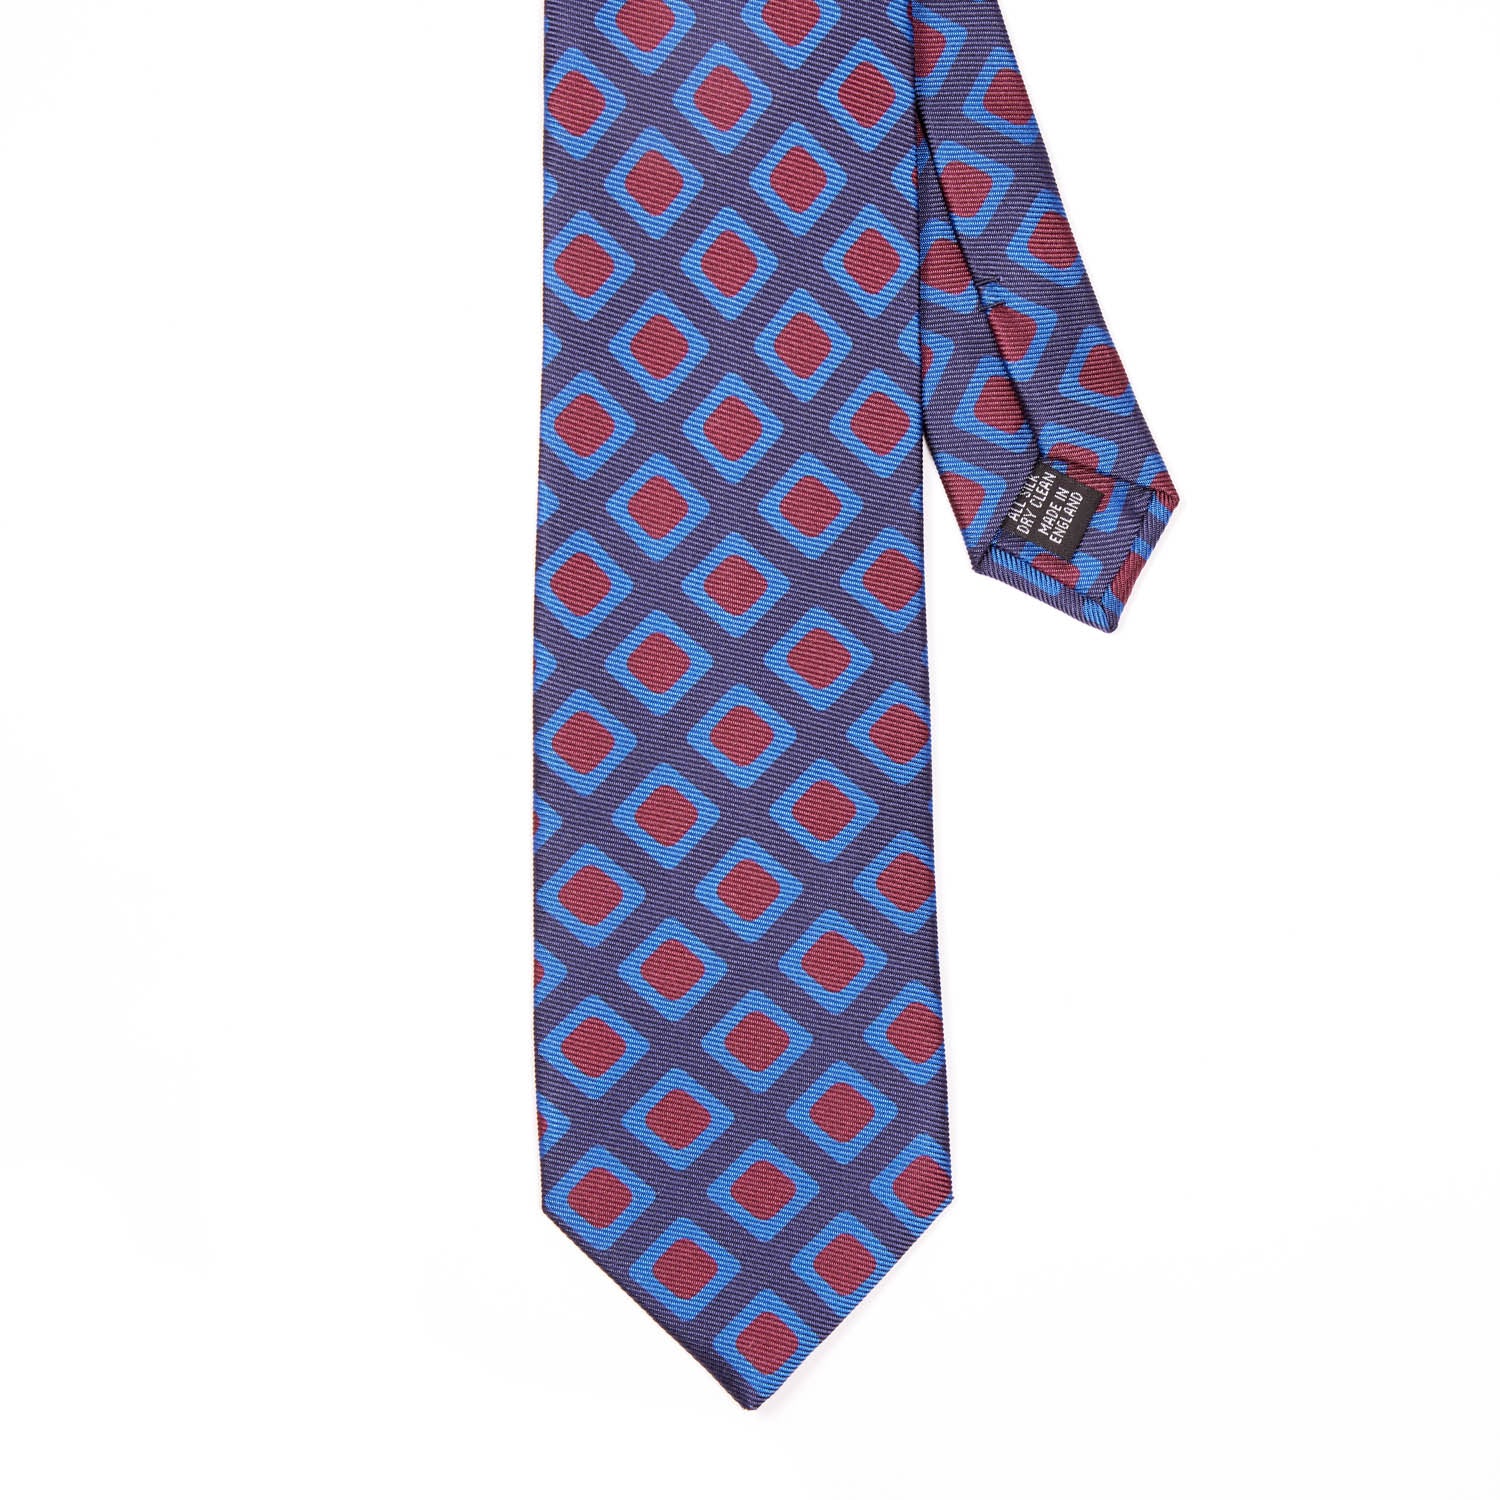 A Sovereign Grade Navy 50 oz Art Deco Tie, 150 cm from KirbyAllison.com, with a geometric pattern in blue and red, known for its quality.